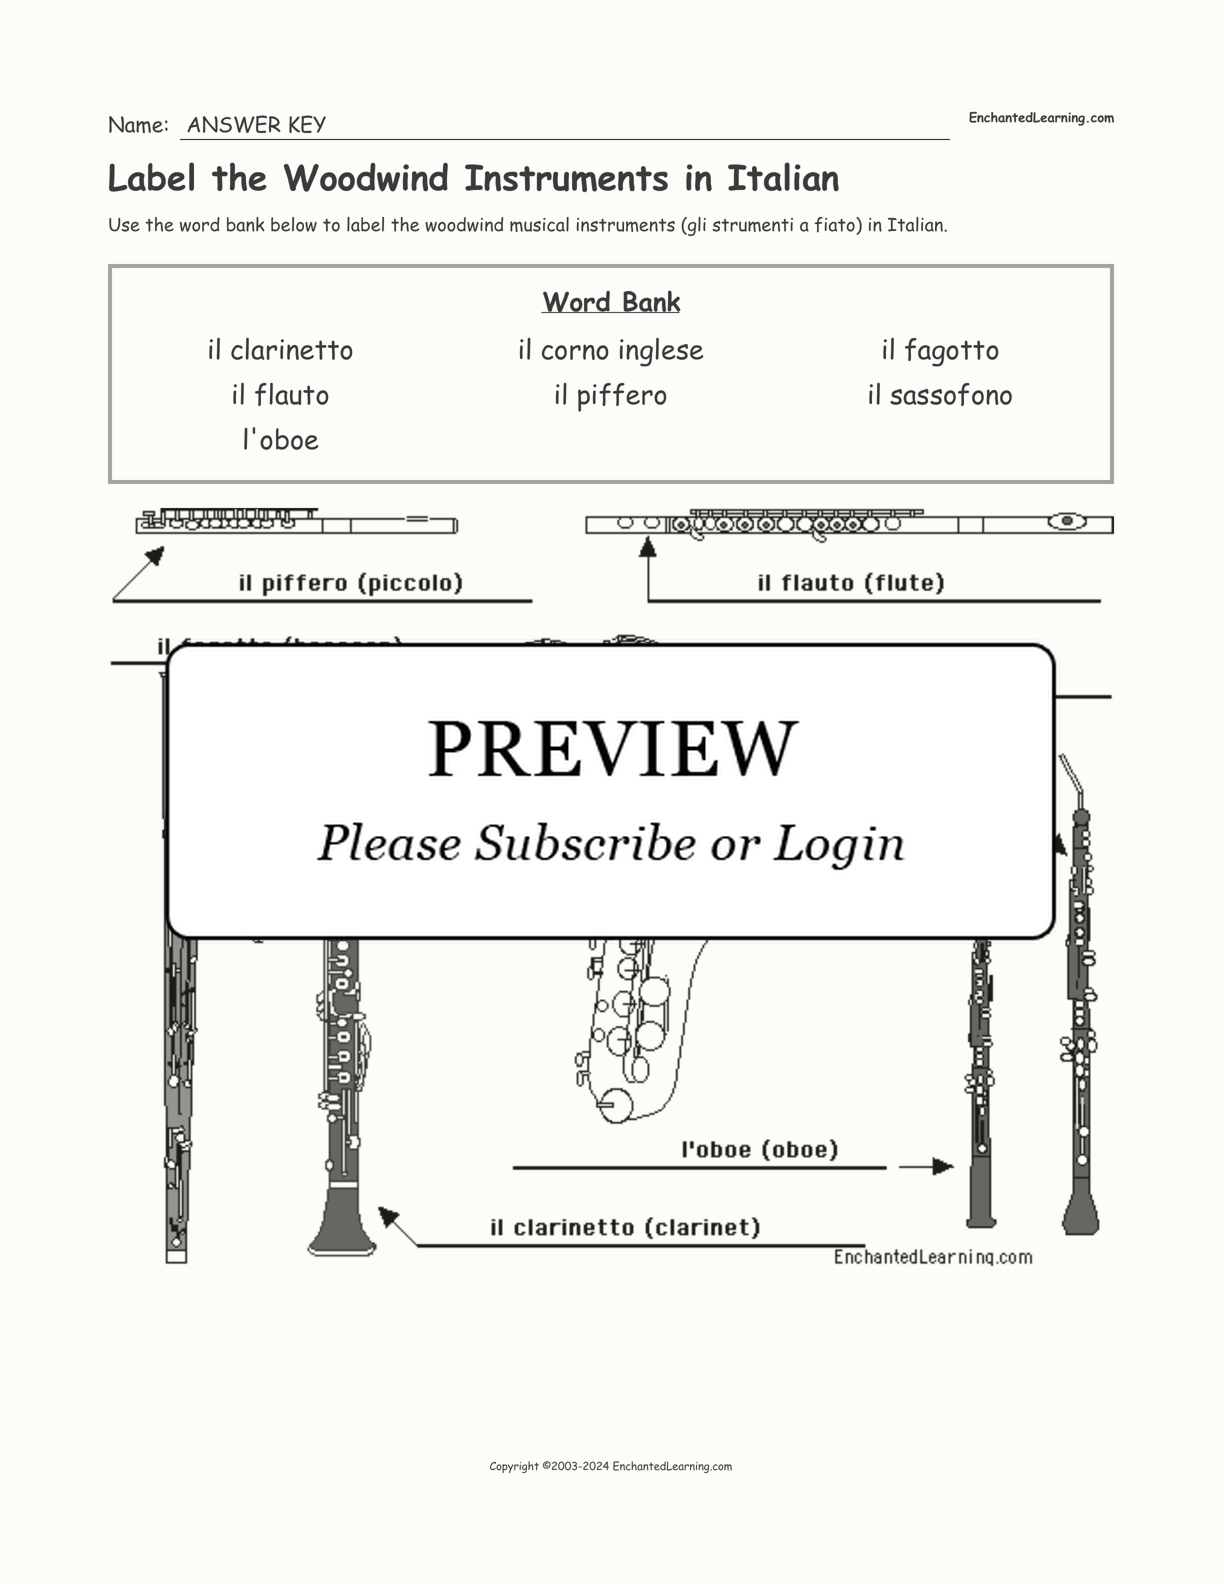 Label the Woodwind Instruments in Italian interactive worksheet page 2